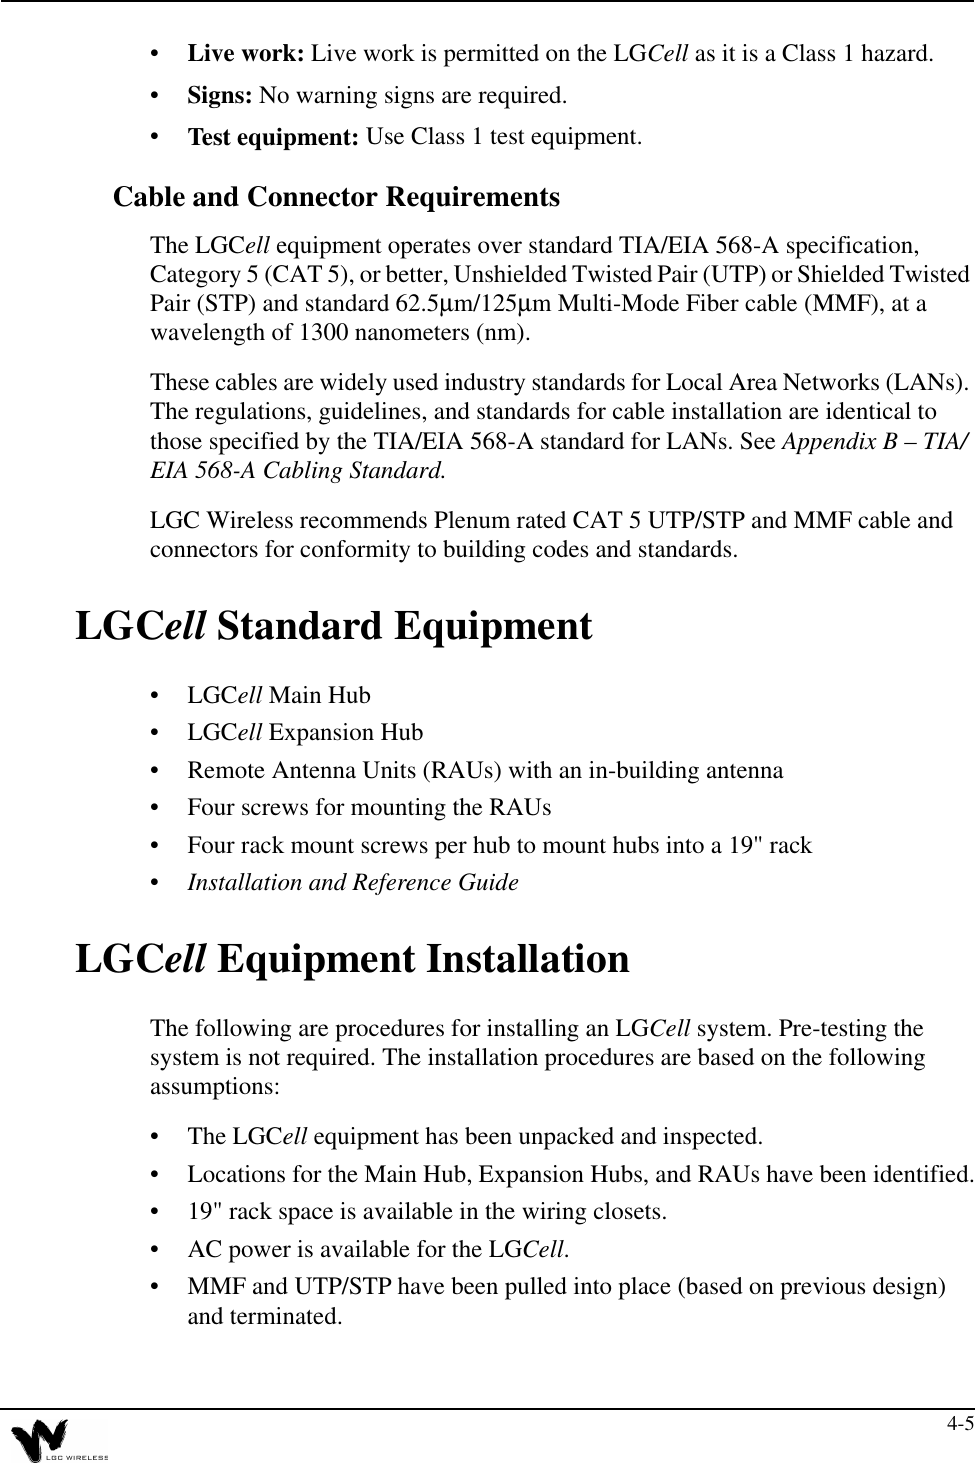 4-5•Live work: Live work is permitted on the LGCell as it is a Class 1 hazard.•Signs: No warning signs are required.•Test equipment: Use Class 1 test equipment.Cable and Connector RequirementsThe LGCell equipment operates over standard TIA/EIA 568-A specification, Category 5 (CAT 5), or better, Unshielded Twisted Pair (UTP) or Shielded Twisted Pair (STP) and standard 62.5µm/125µm Multi-Mode Fiber cable (MMF), at a wavelength of 1300 nanometers (nm). These cables are widely used industry standards for Local Area Networks (LANs). The regulations, guidelines, and standards for cable installation are identical to those specified by the TIA/EIA 568-A standard for LANs. See Appendix B – TIA/EIA 568-A Cabling Standard.LGC Wireless recommends Plenum rated CAT 5 UTP/STP and MMF cable and connectors for conformity to building codes and standards.LGCell Standard Equipment•LGCell Main Hub•LGCell Expansion Hub•Remote Antenna Units (RAUs) with an in-building antenna•Four screws for mounting the RAUs•Four rack mount screws per hub to mount hubs into a 19&quot; rack•Installation and Reference GuideLGCell Equipment InstallationThe following are procedures for installing an LGCell system. Pre-testing the system is not required. The installation procedures are based on the following assumptions:•The LGCell equipment has been unpacked and inspected.•Locations for the Main Hub, Expansion Hubs, and RAUs have been identified.•19&quot; rack space is available in the wiring closets.•AC power is available for the LGCell.•MMF and UTP/STP have been pulled into place (based on previous design) and terminated.